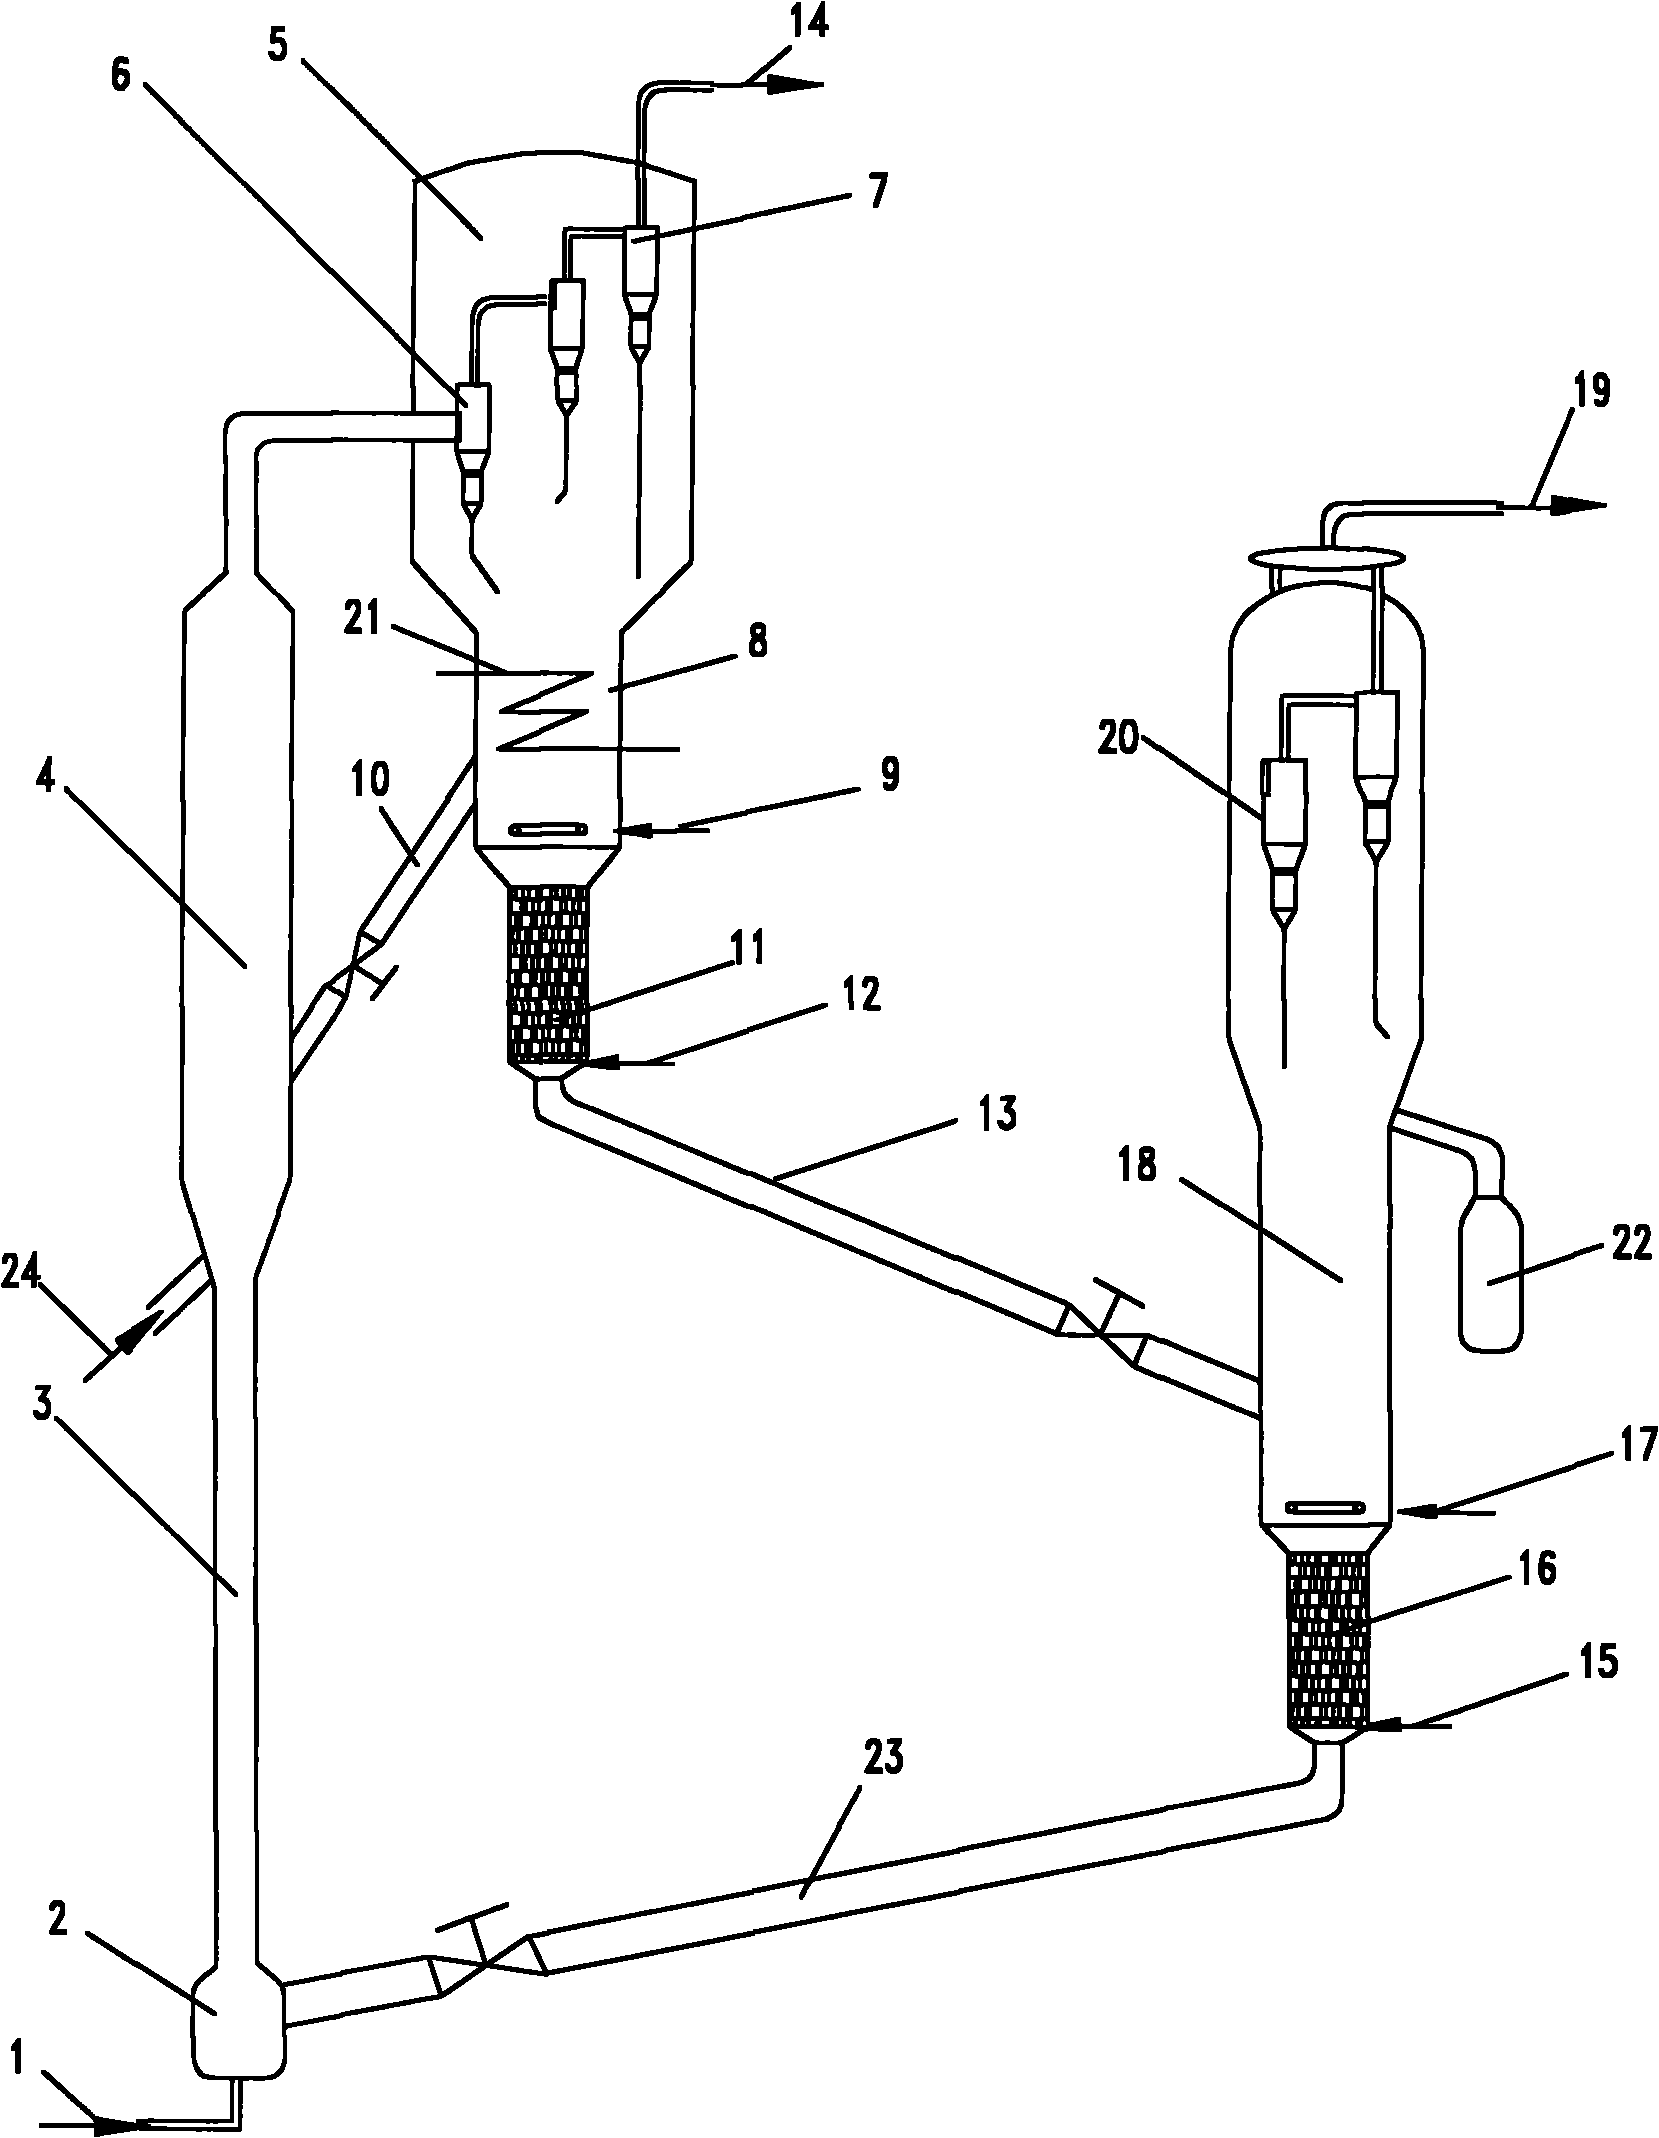 Reaction device for co-producing low-carbon olefin and p-xylene